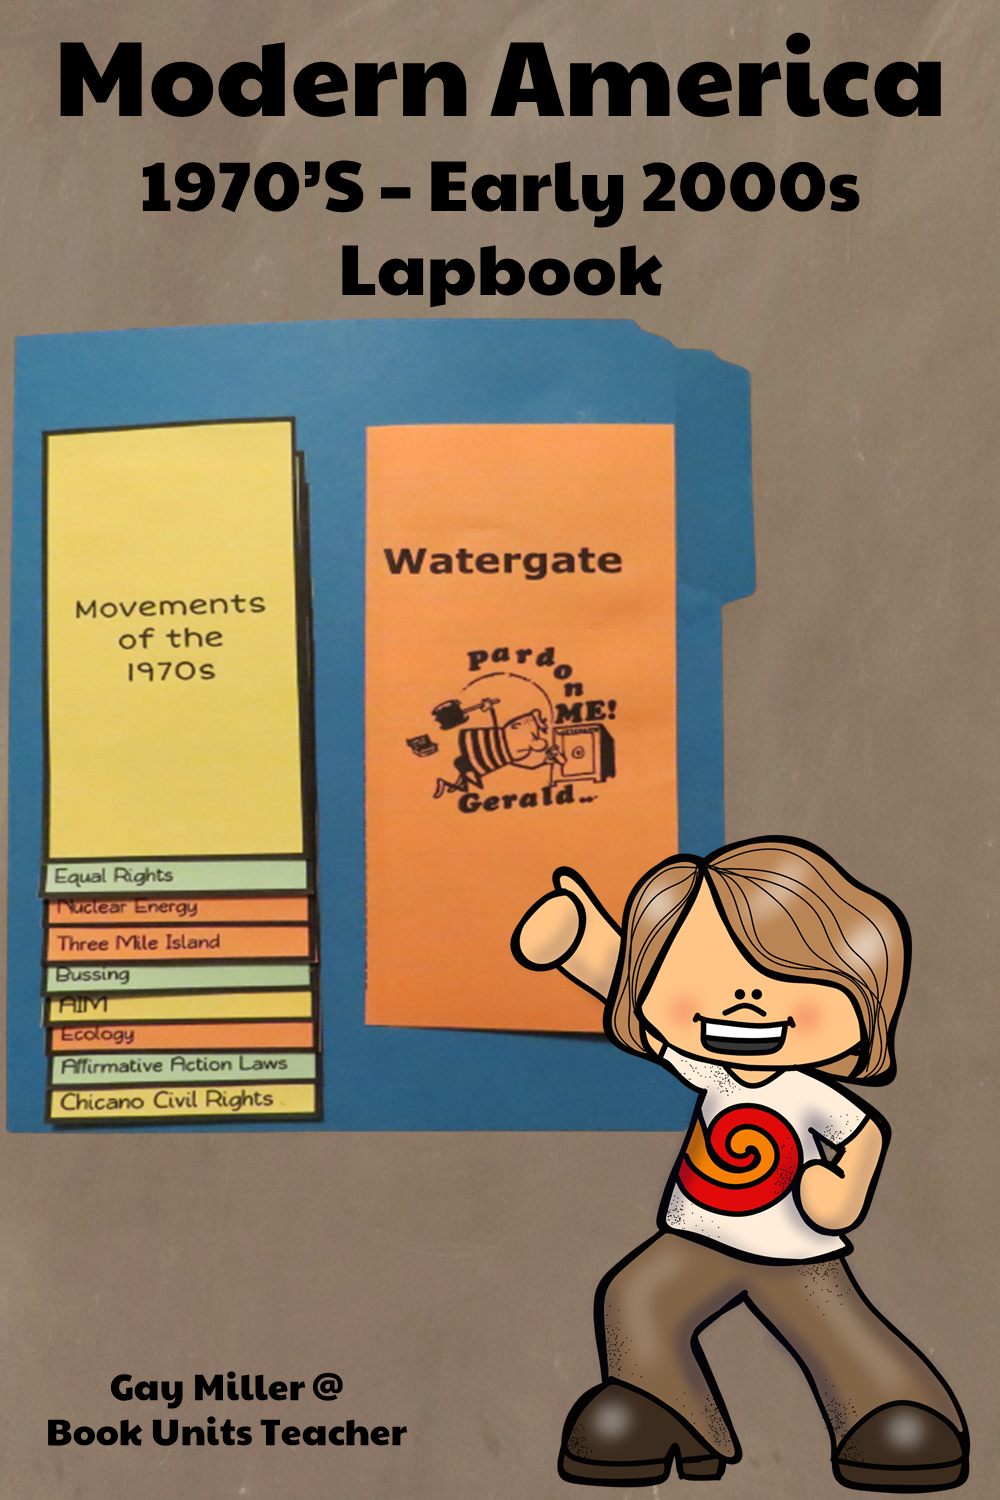 Purchase Modern America Lapbook on Teachers Pay Teachers. This activity is great for upper elementary including 4th, 5th, and 6th graders.